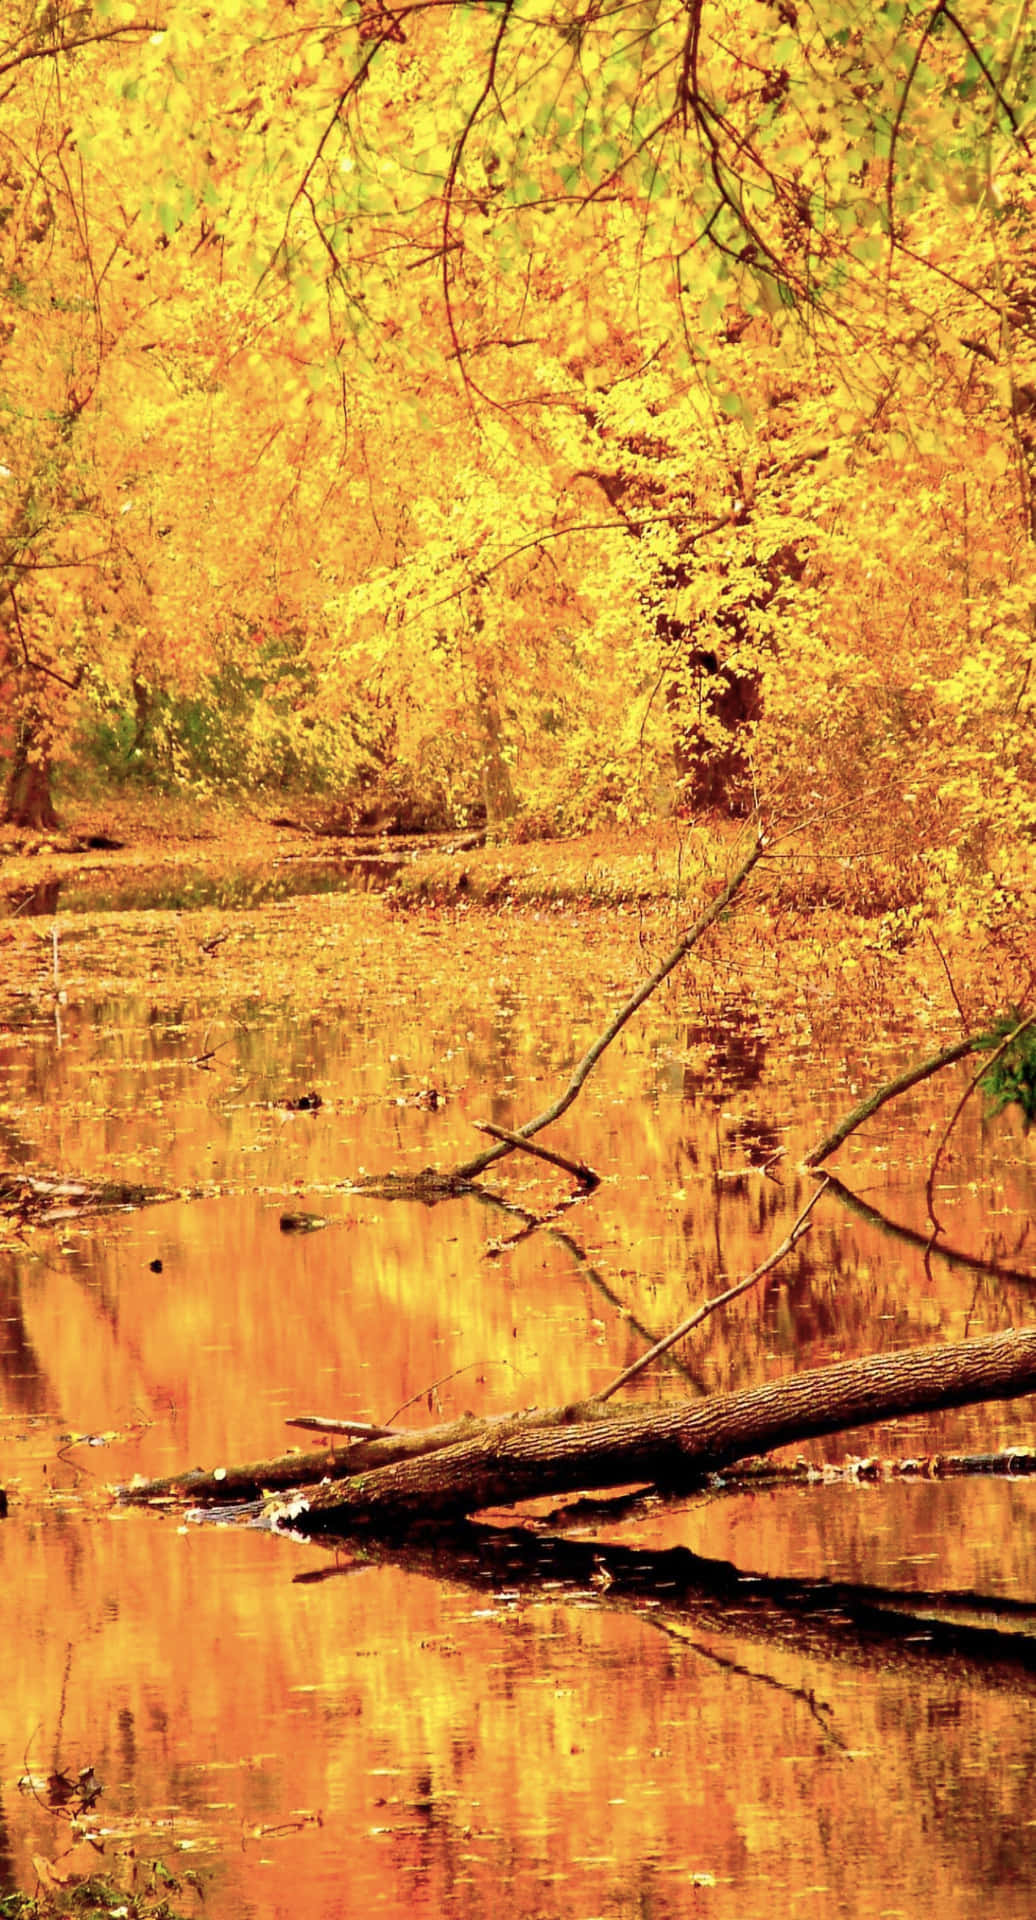 Feel the rush of the autumn leaves with this stunning iPhone wallpaper!